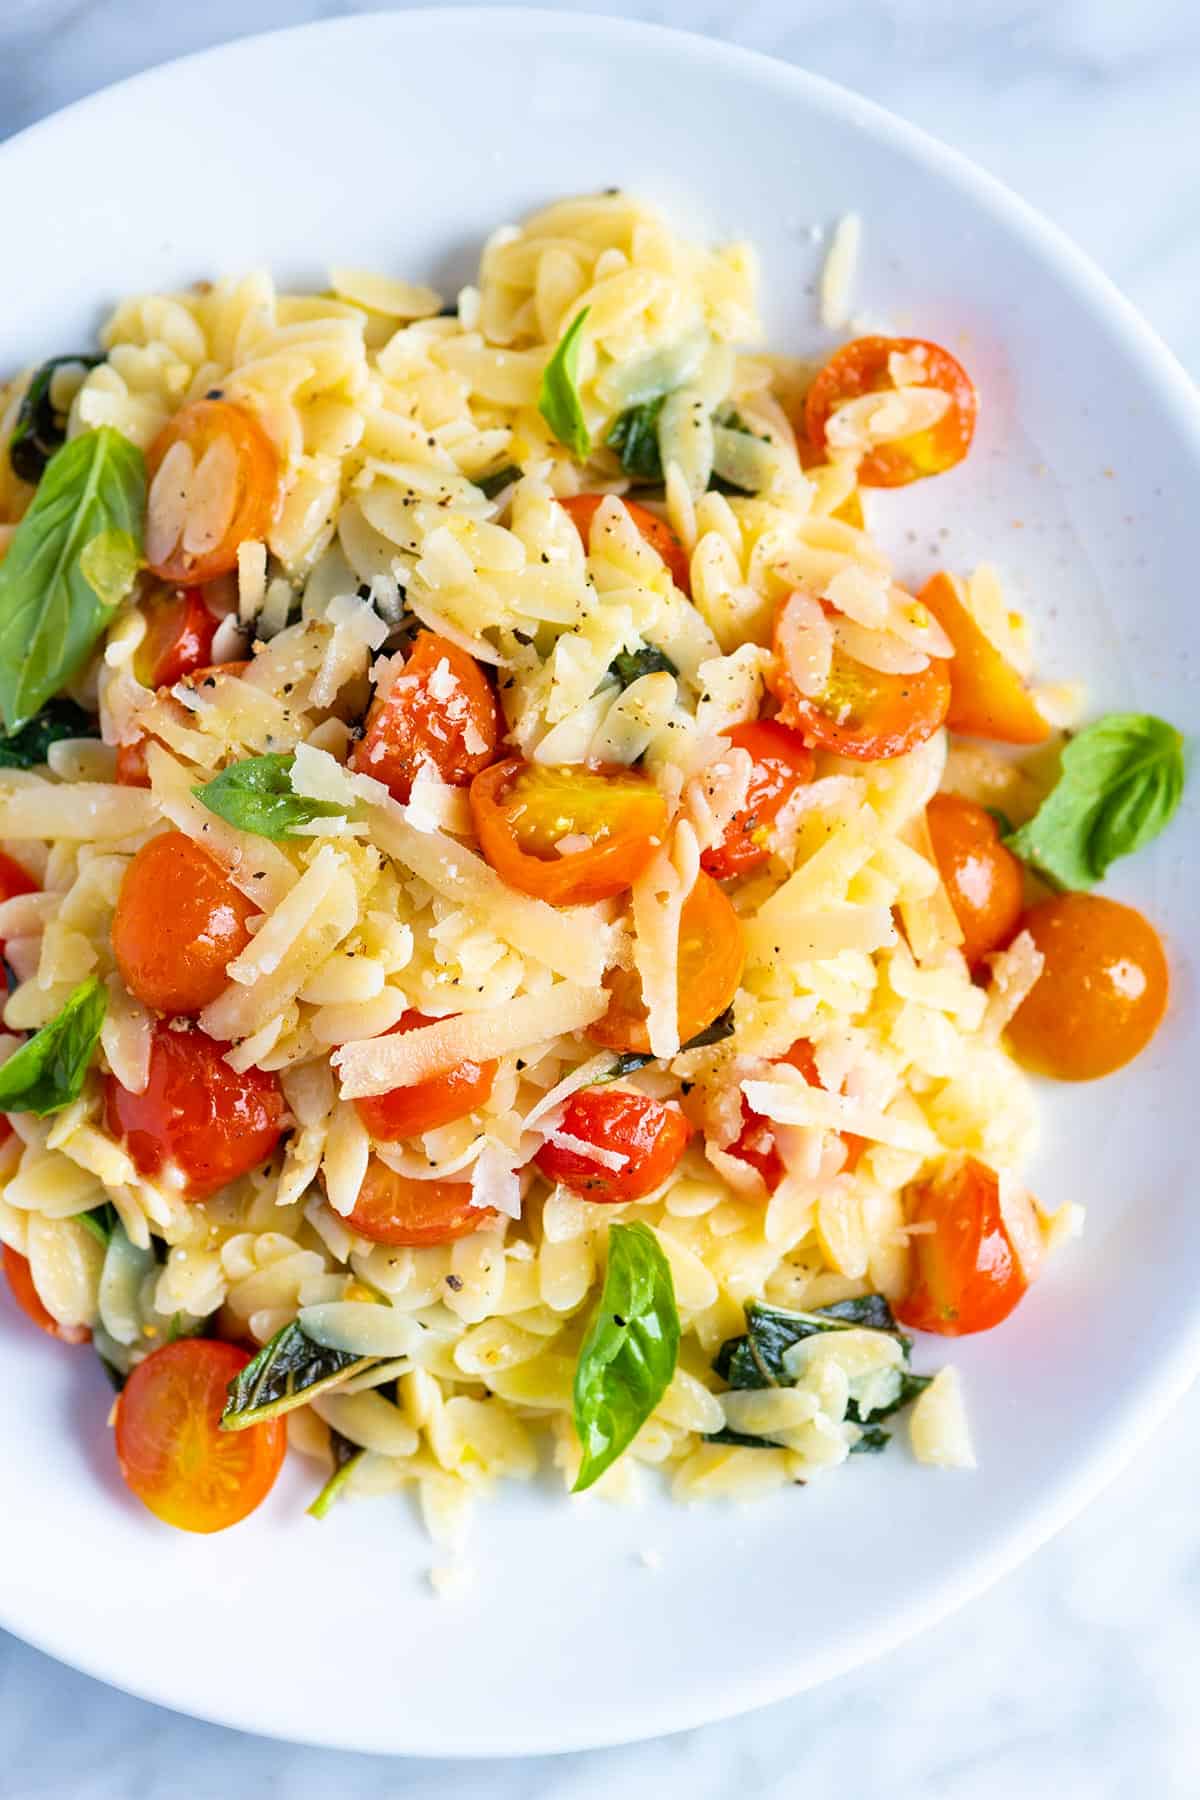 Orzo Pasta with Tomatoes, Parmesan Cheese and Basil